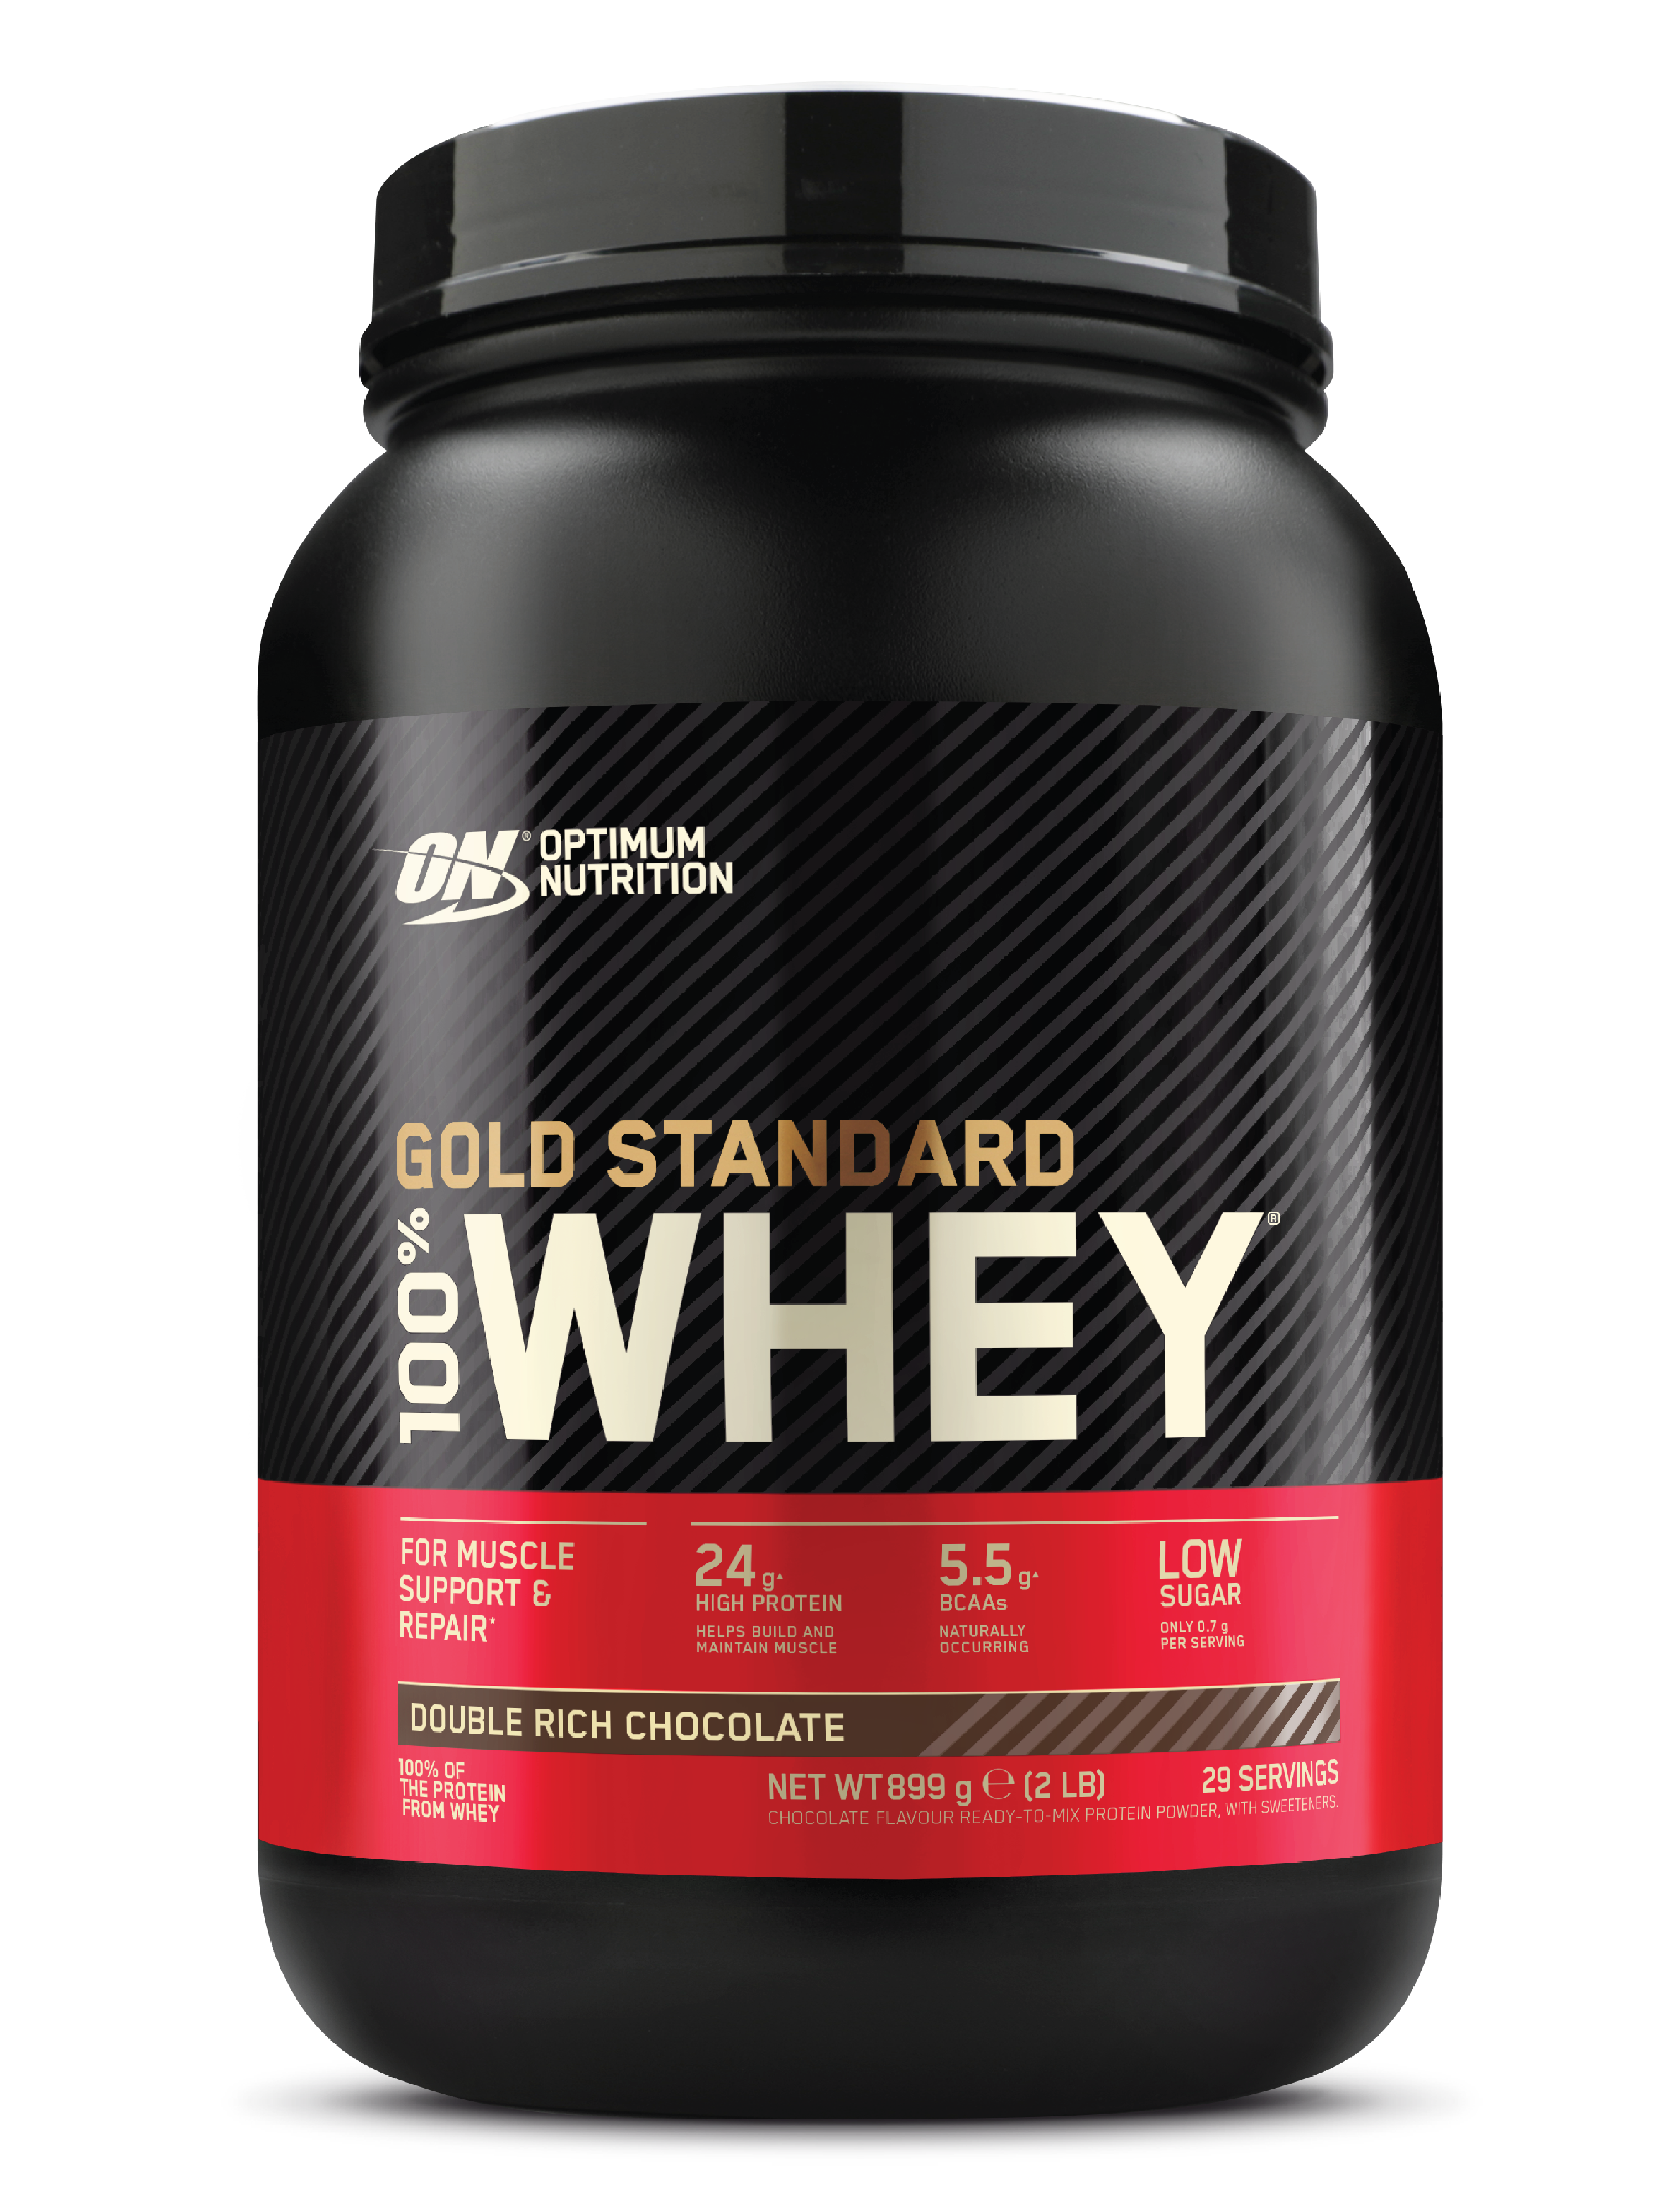 Optimum Nutrition 100% Whey GOLD Standard Whey, Double Rich Chocolate, 899 g